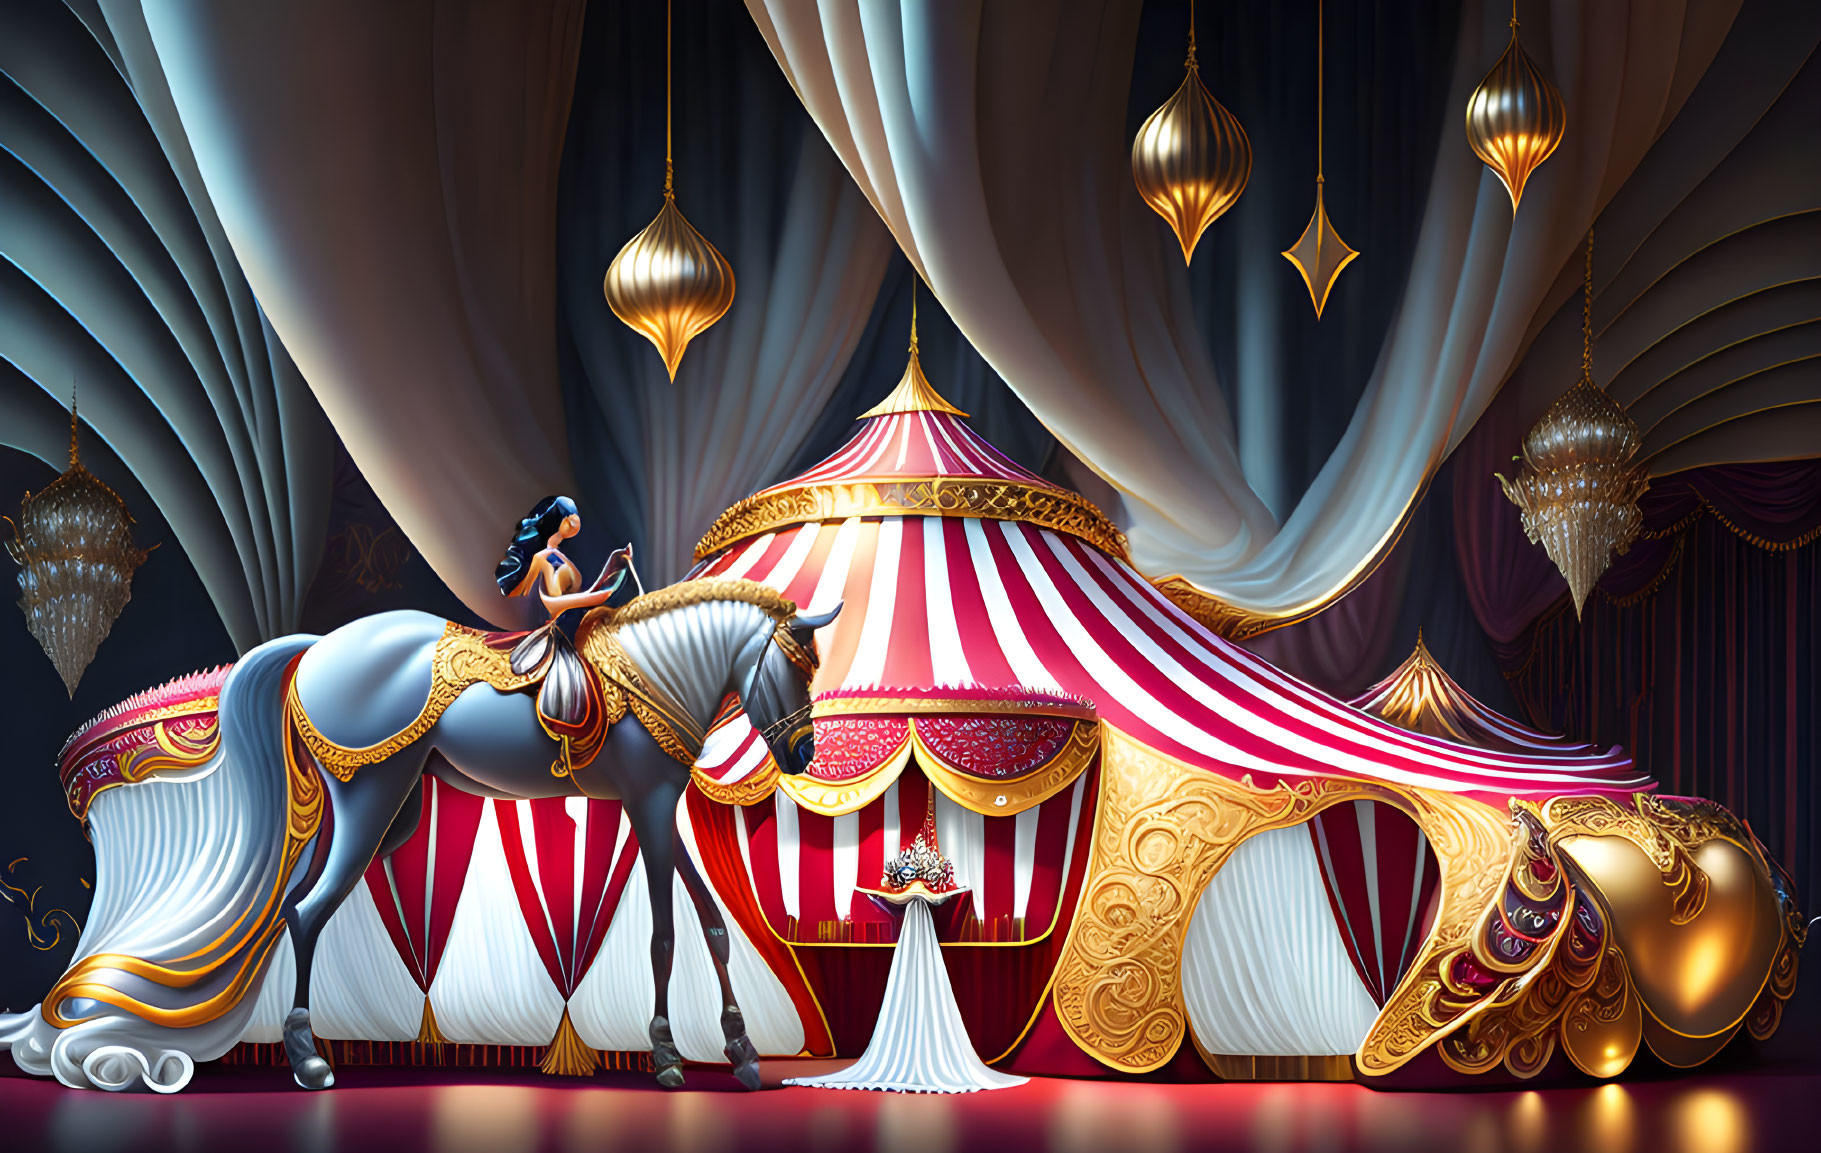 Vibrant circus interior with elephant and performer